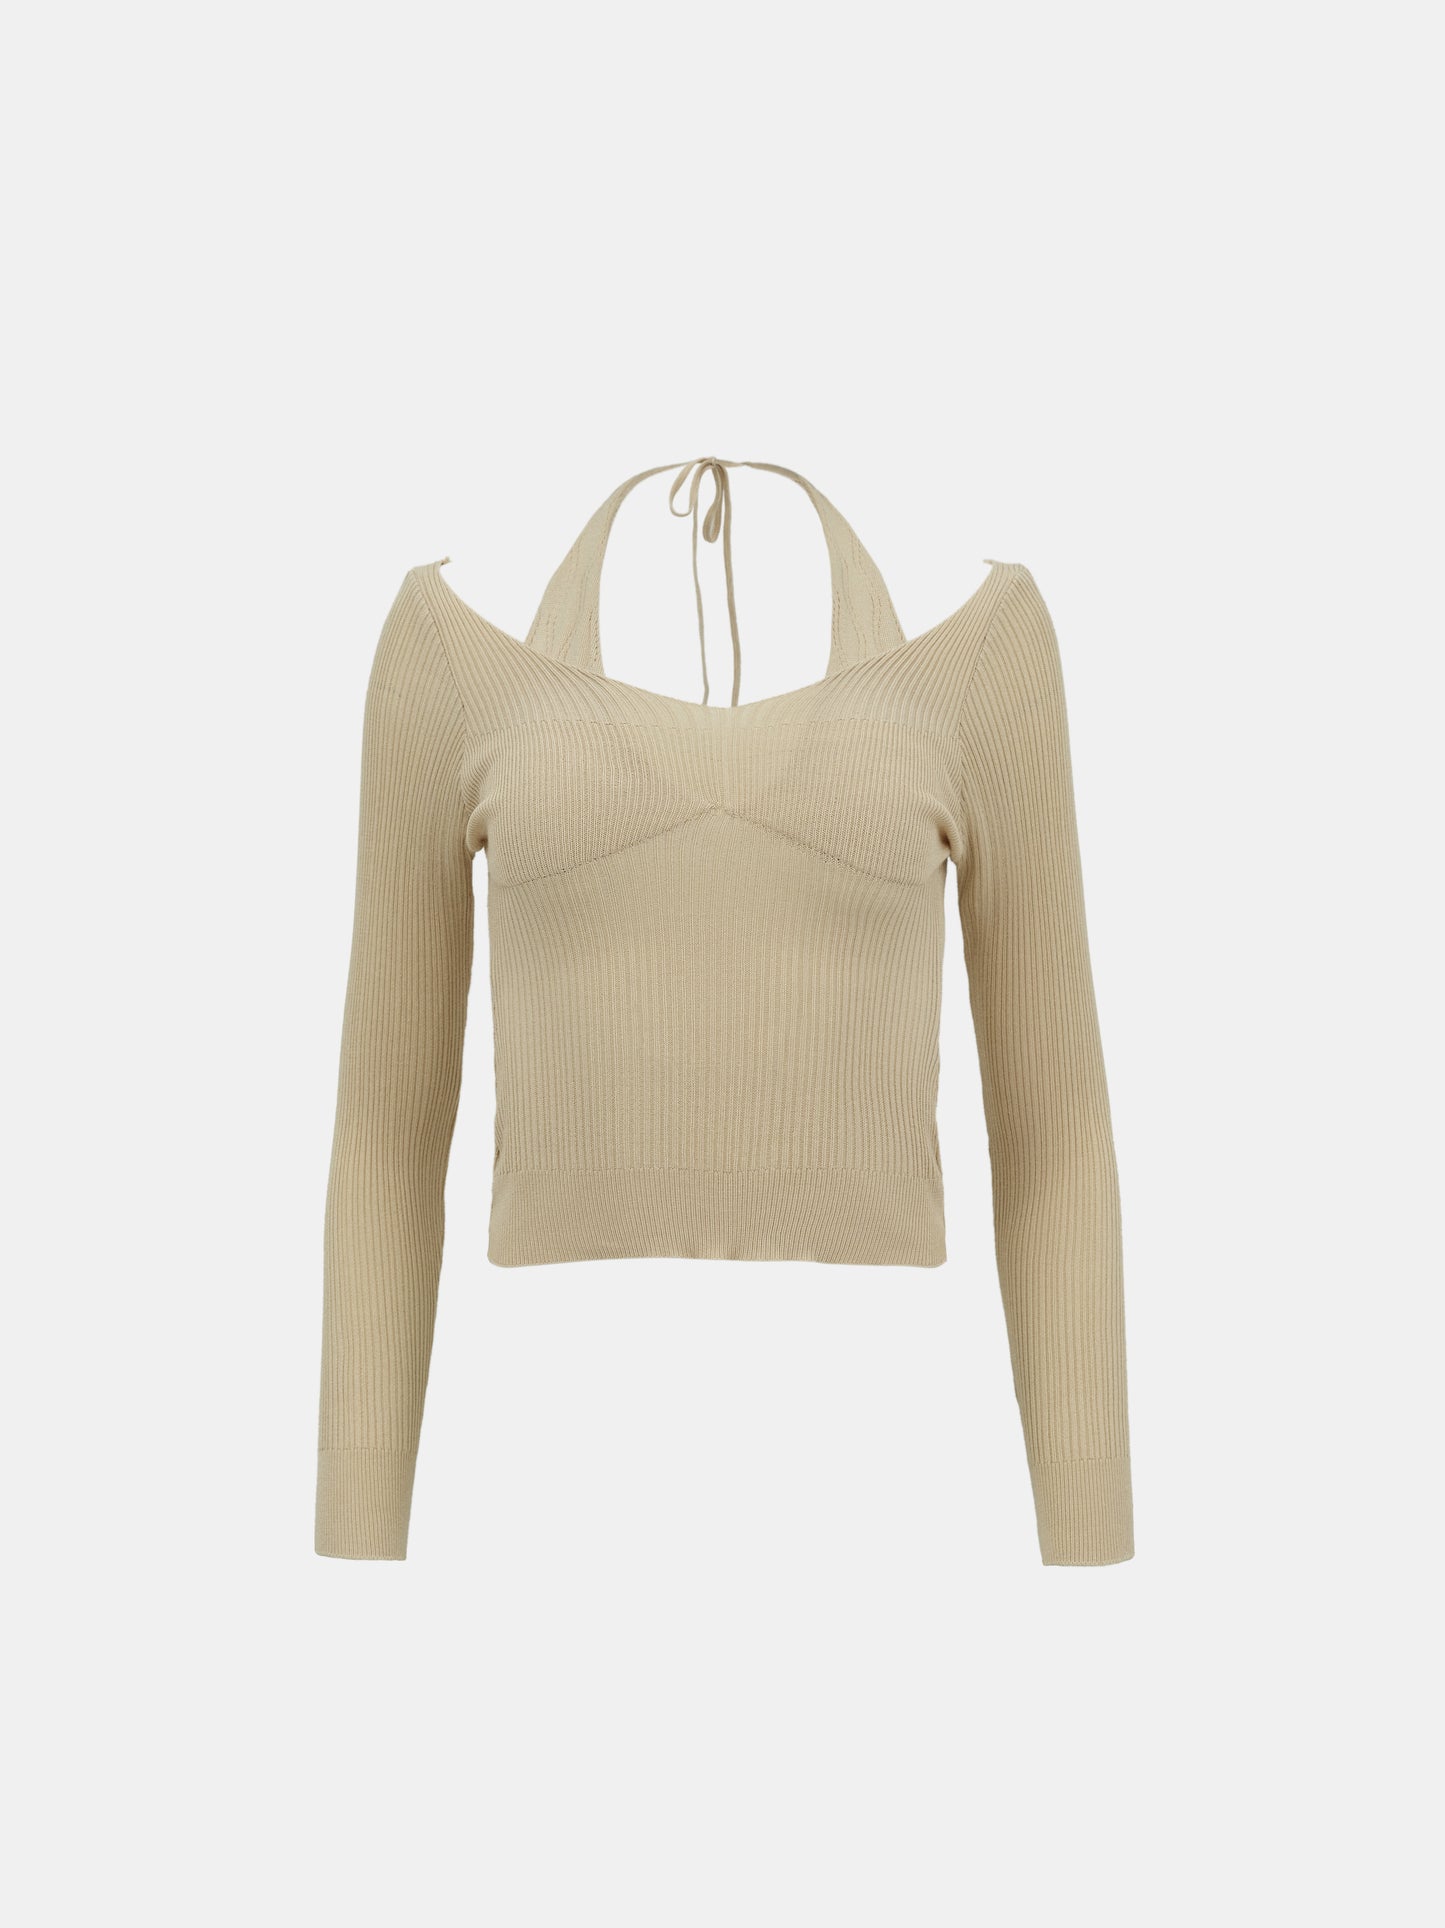 Duo Layered Knit Top, Buttermilk